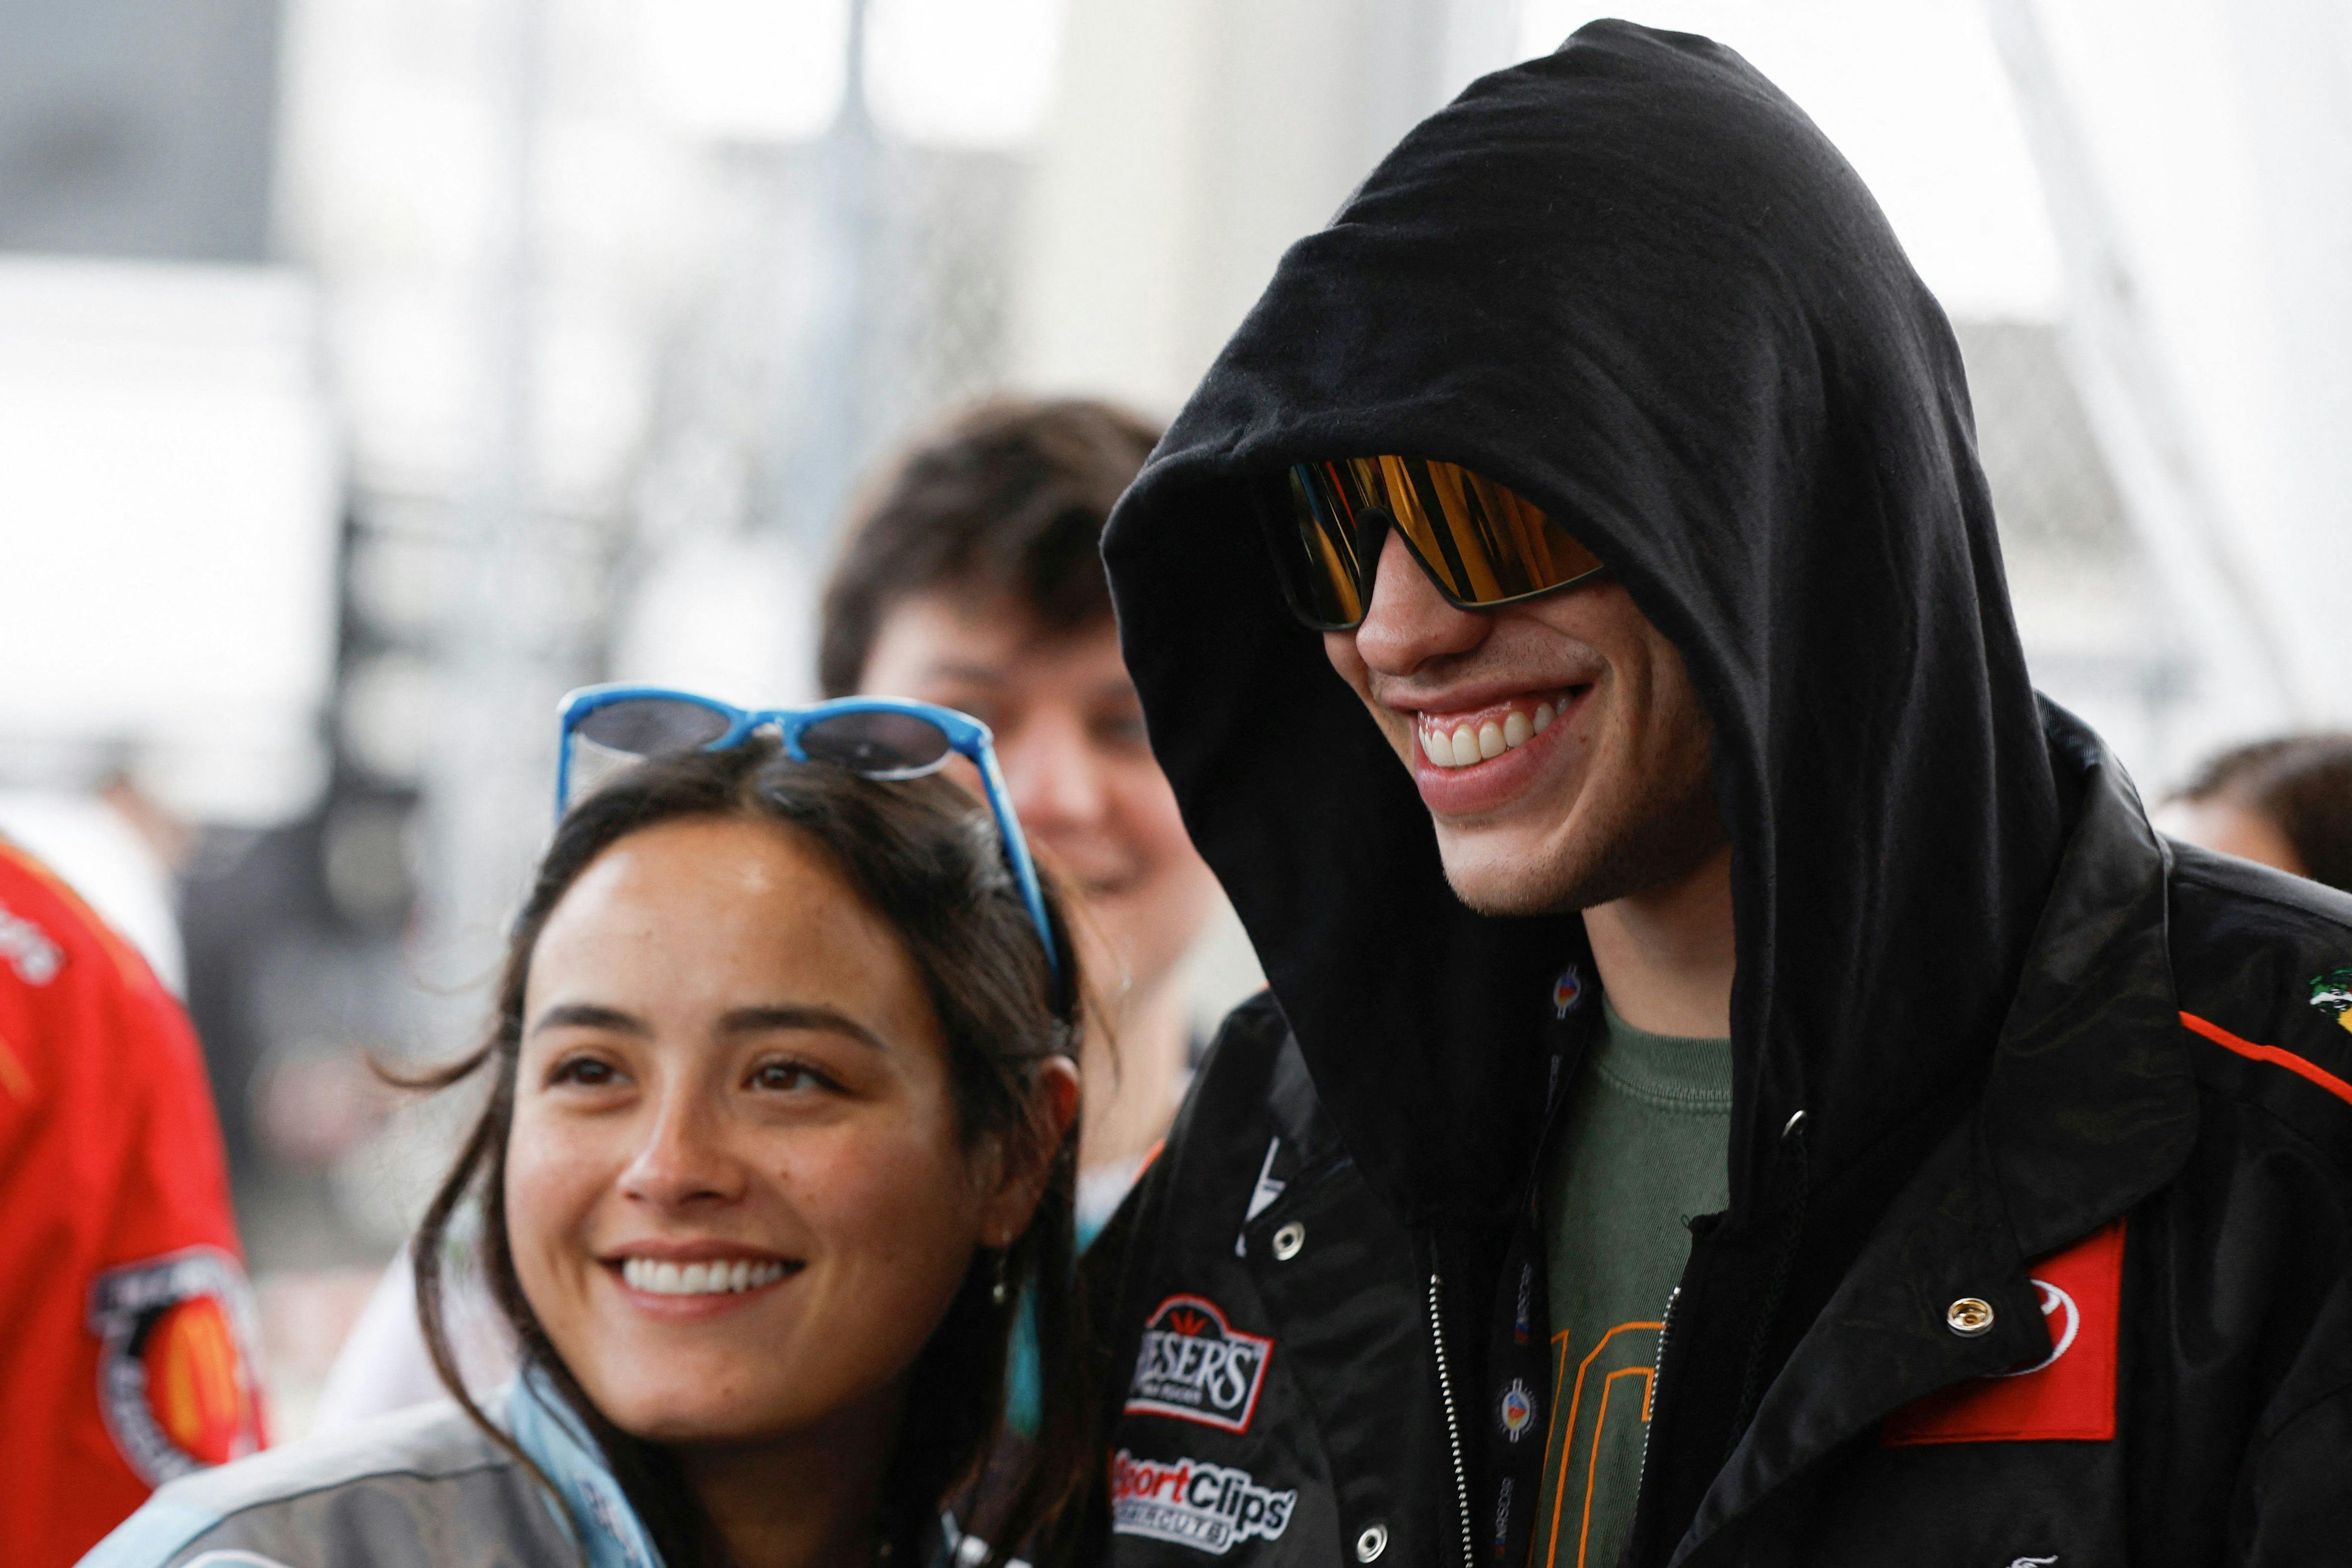 DAYTONA BEACH, FLORIDA - FEBRUARY 19: Pete Davidson and Chase Sui attend a tour prior to the NASCAR Cup Series 65th Annual Daytona 500 at Daytona International Speedway on February 19, 2023 in Daytona Beach, Florida. Sean Gardner/Getty Images/AFP (Photo by Sean Gardner / GETTY IMAGES NORTH AMERICA / Getty Images via AFP)